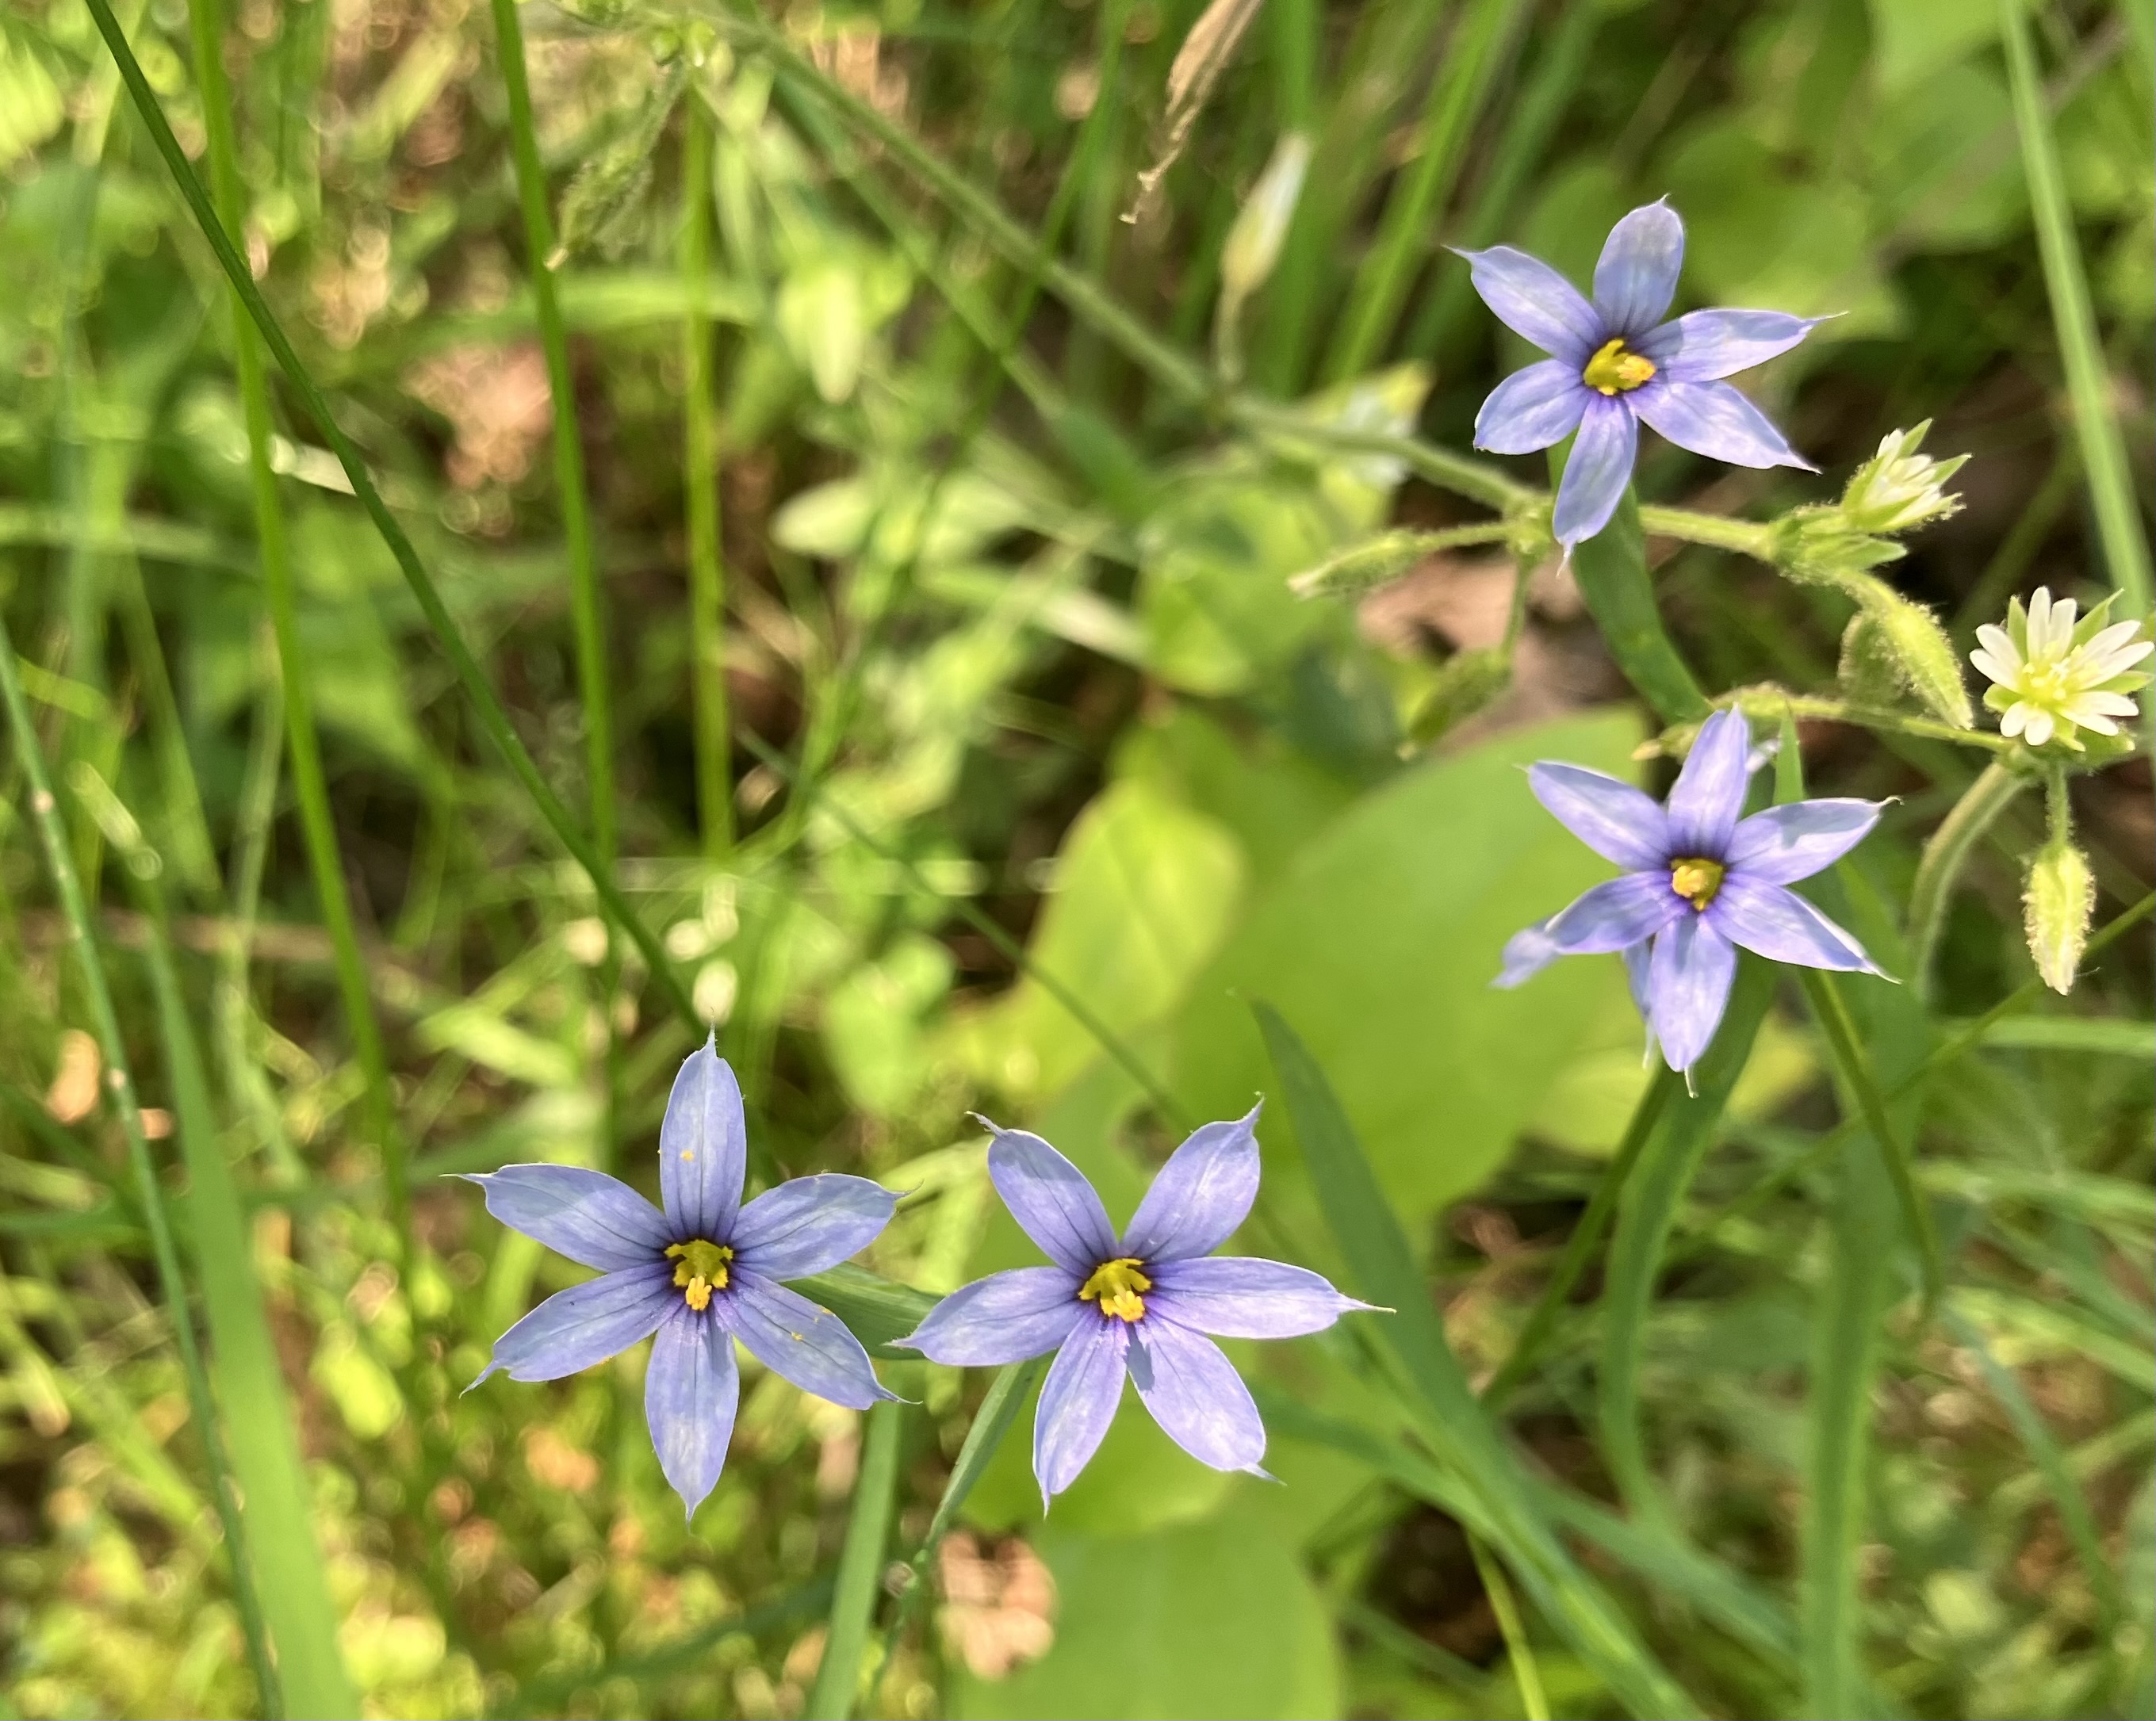 blue-eyed grass flowering among grasses and moss